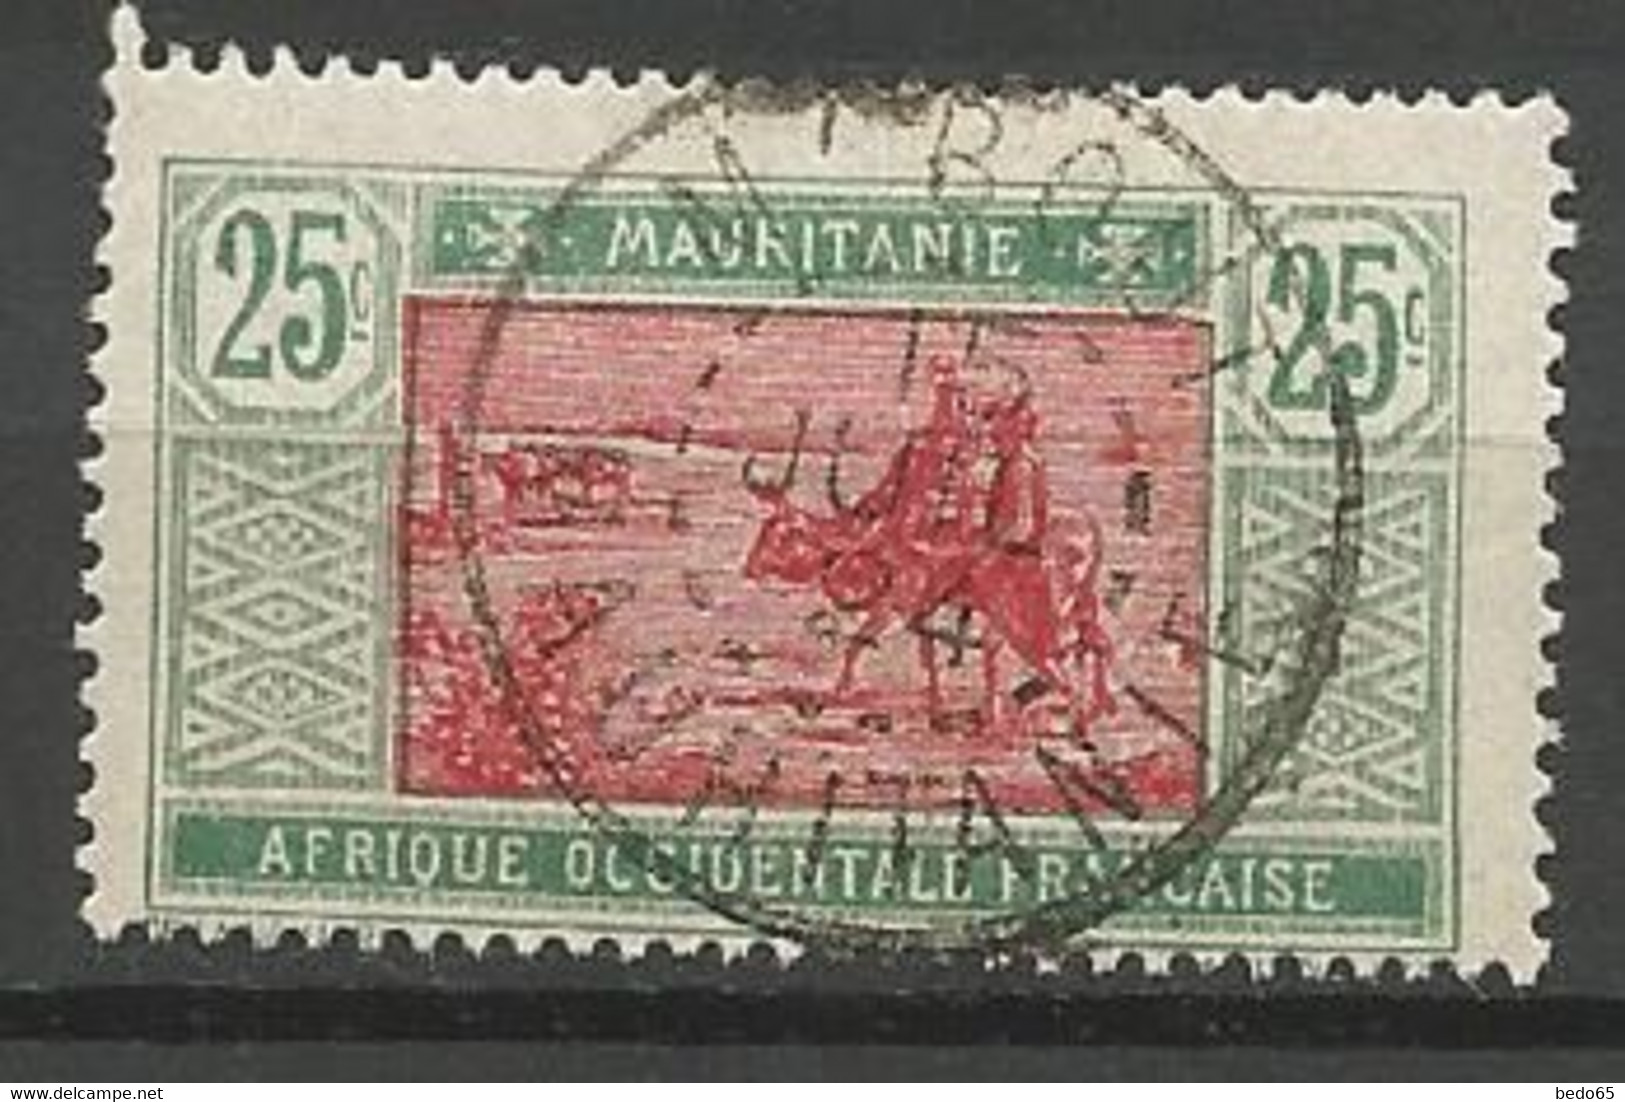 MAURITANIE N° 42 CACHET M' BOUT - Used Stamps